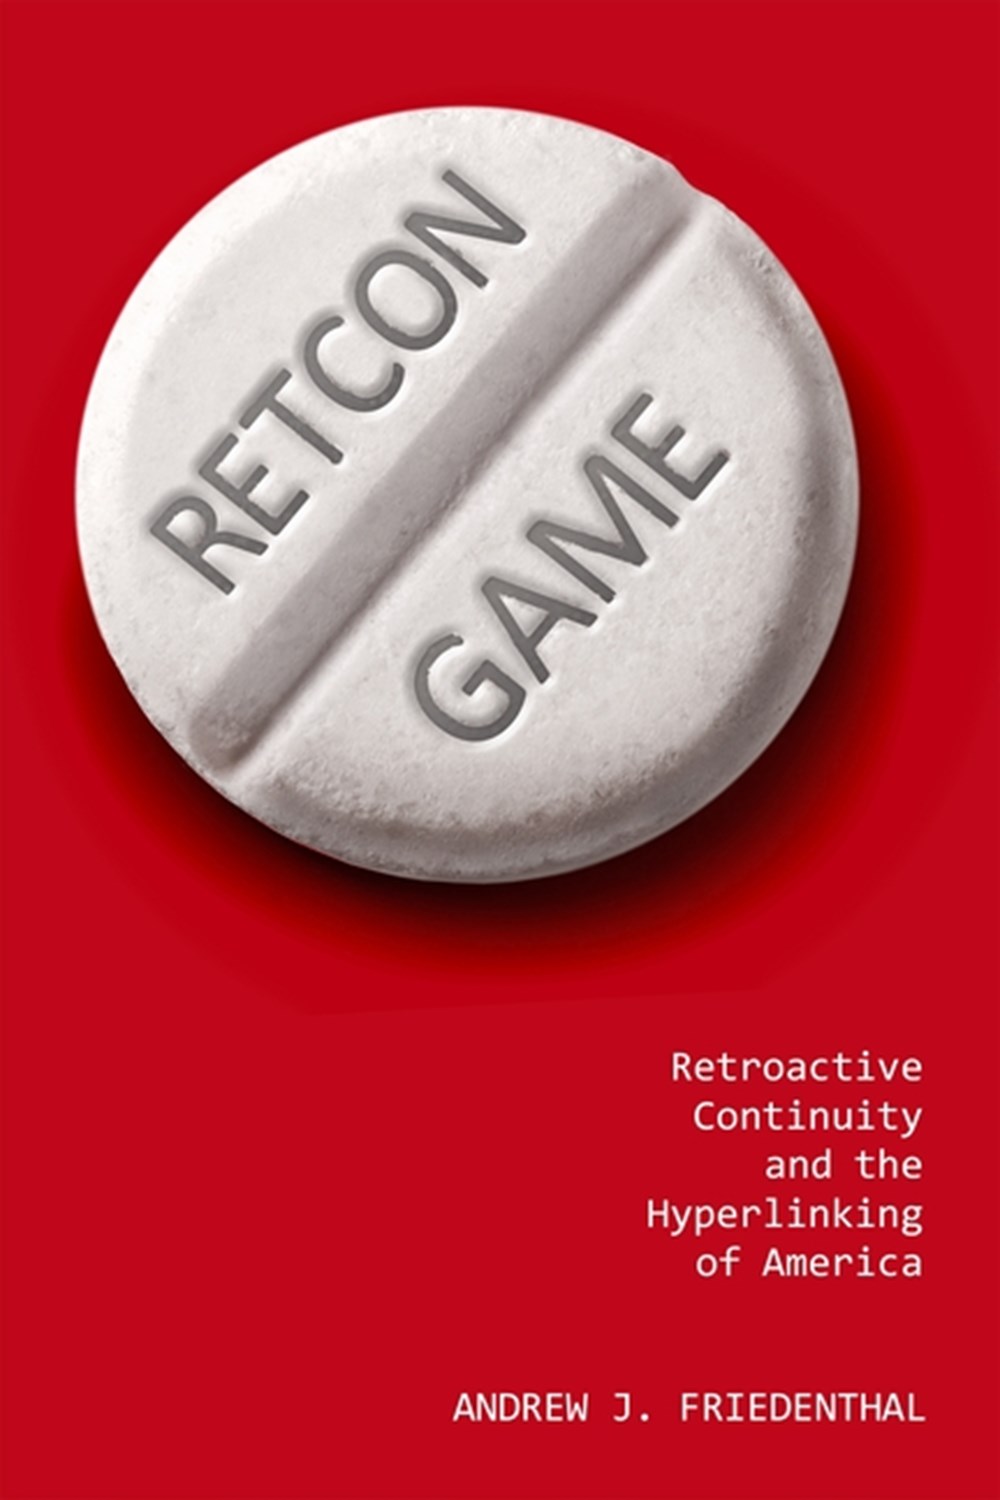 Retcon Game Retroactive Continuity and the Hyperlinking of America